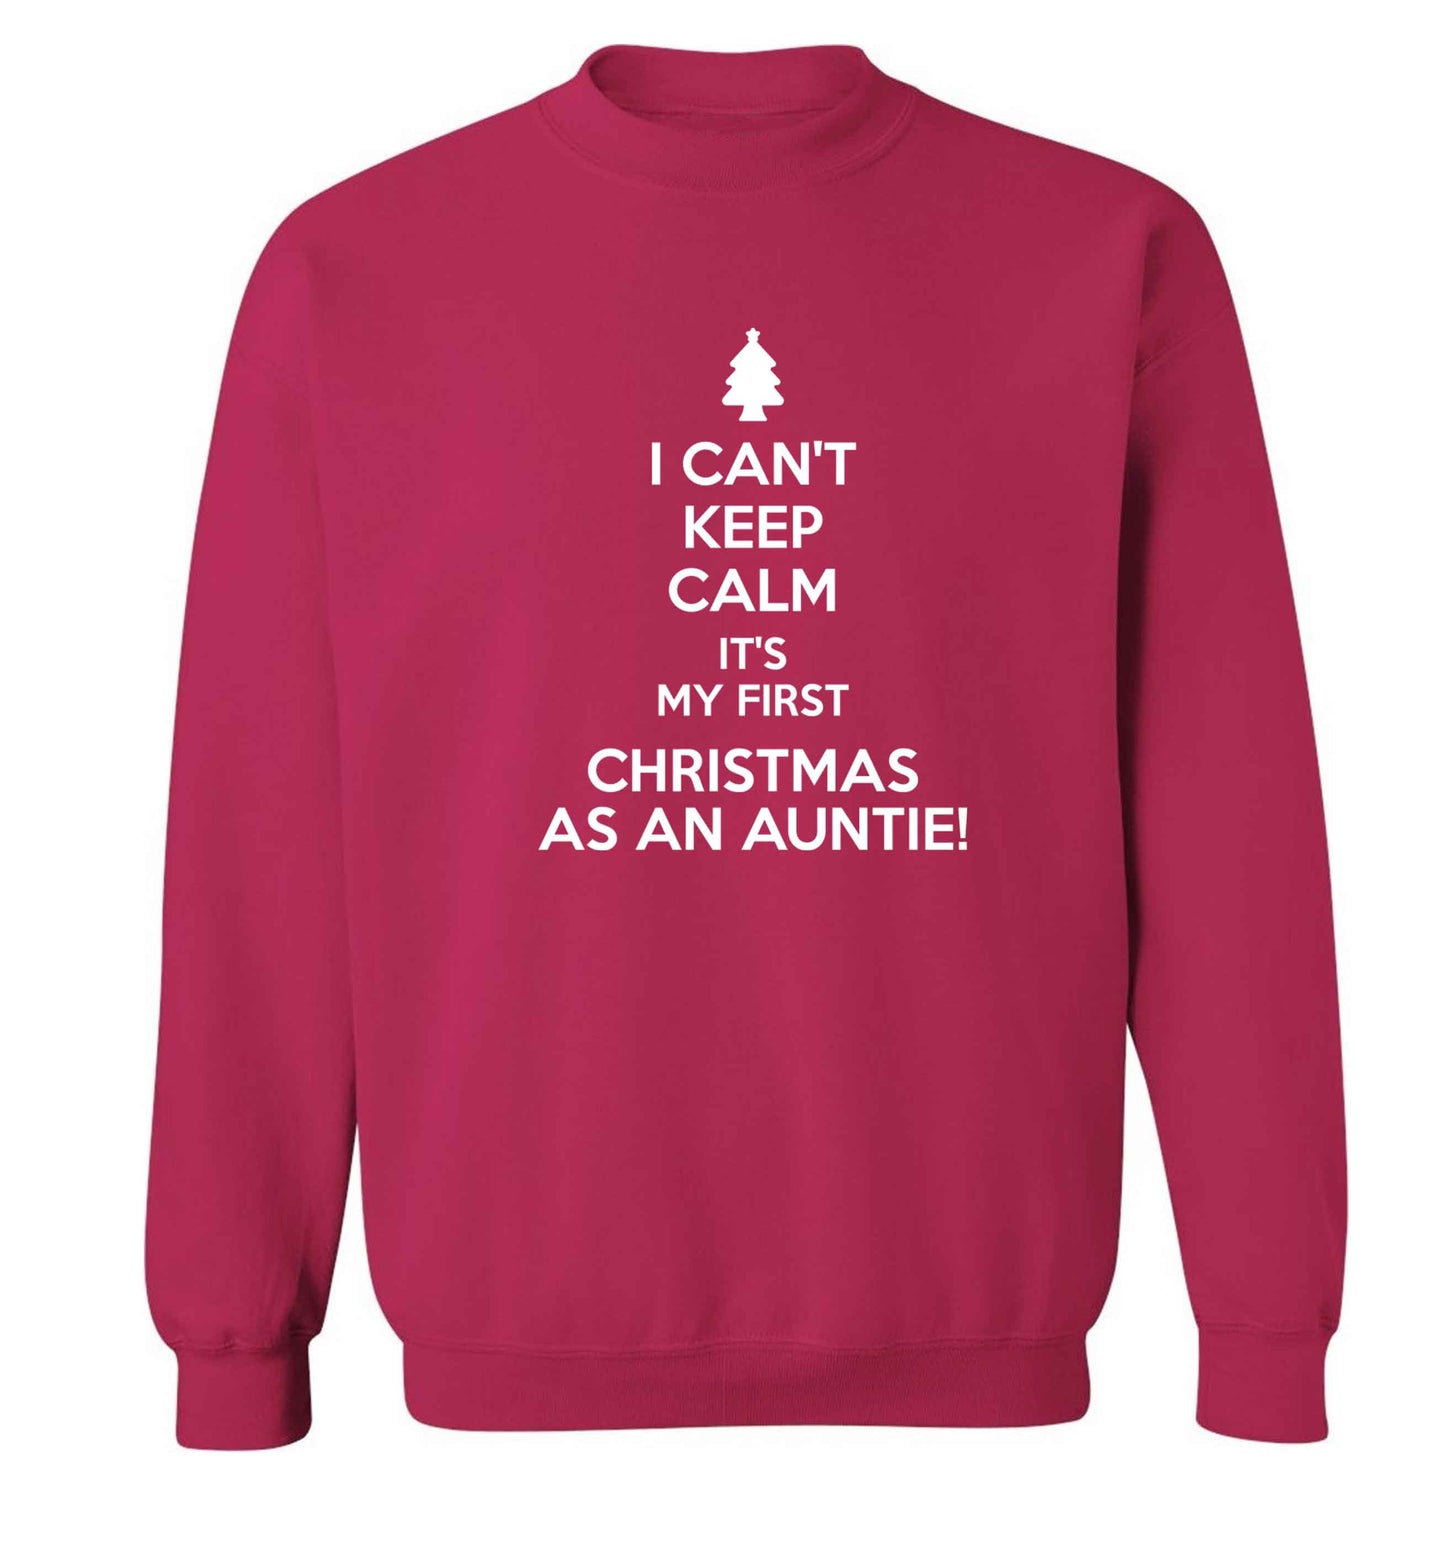 I can't keep calm it's my first Christmas as an auntie! Adult's unisex pink Sweater 2XL